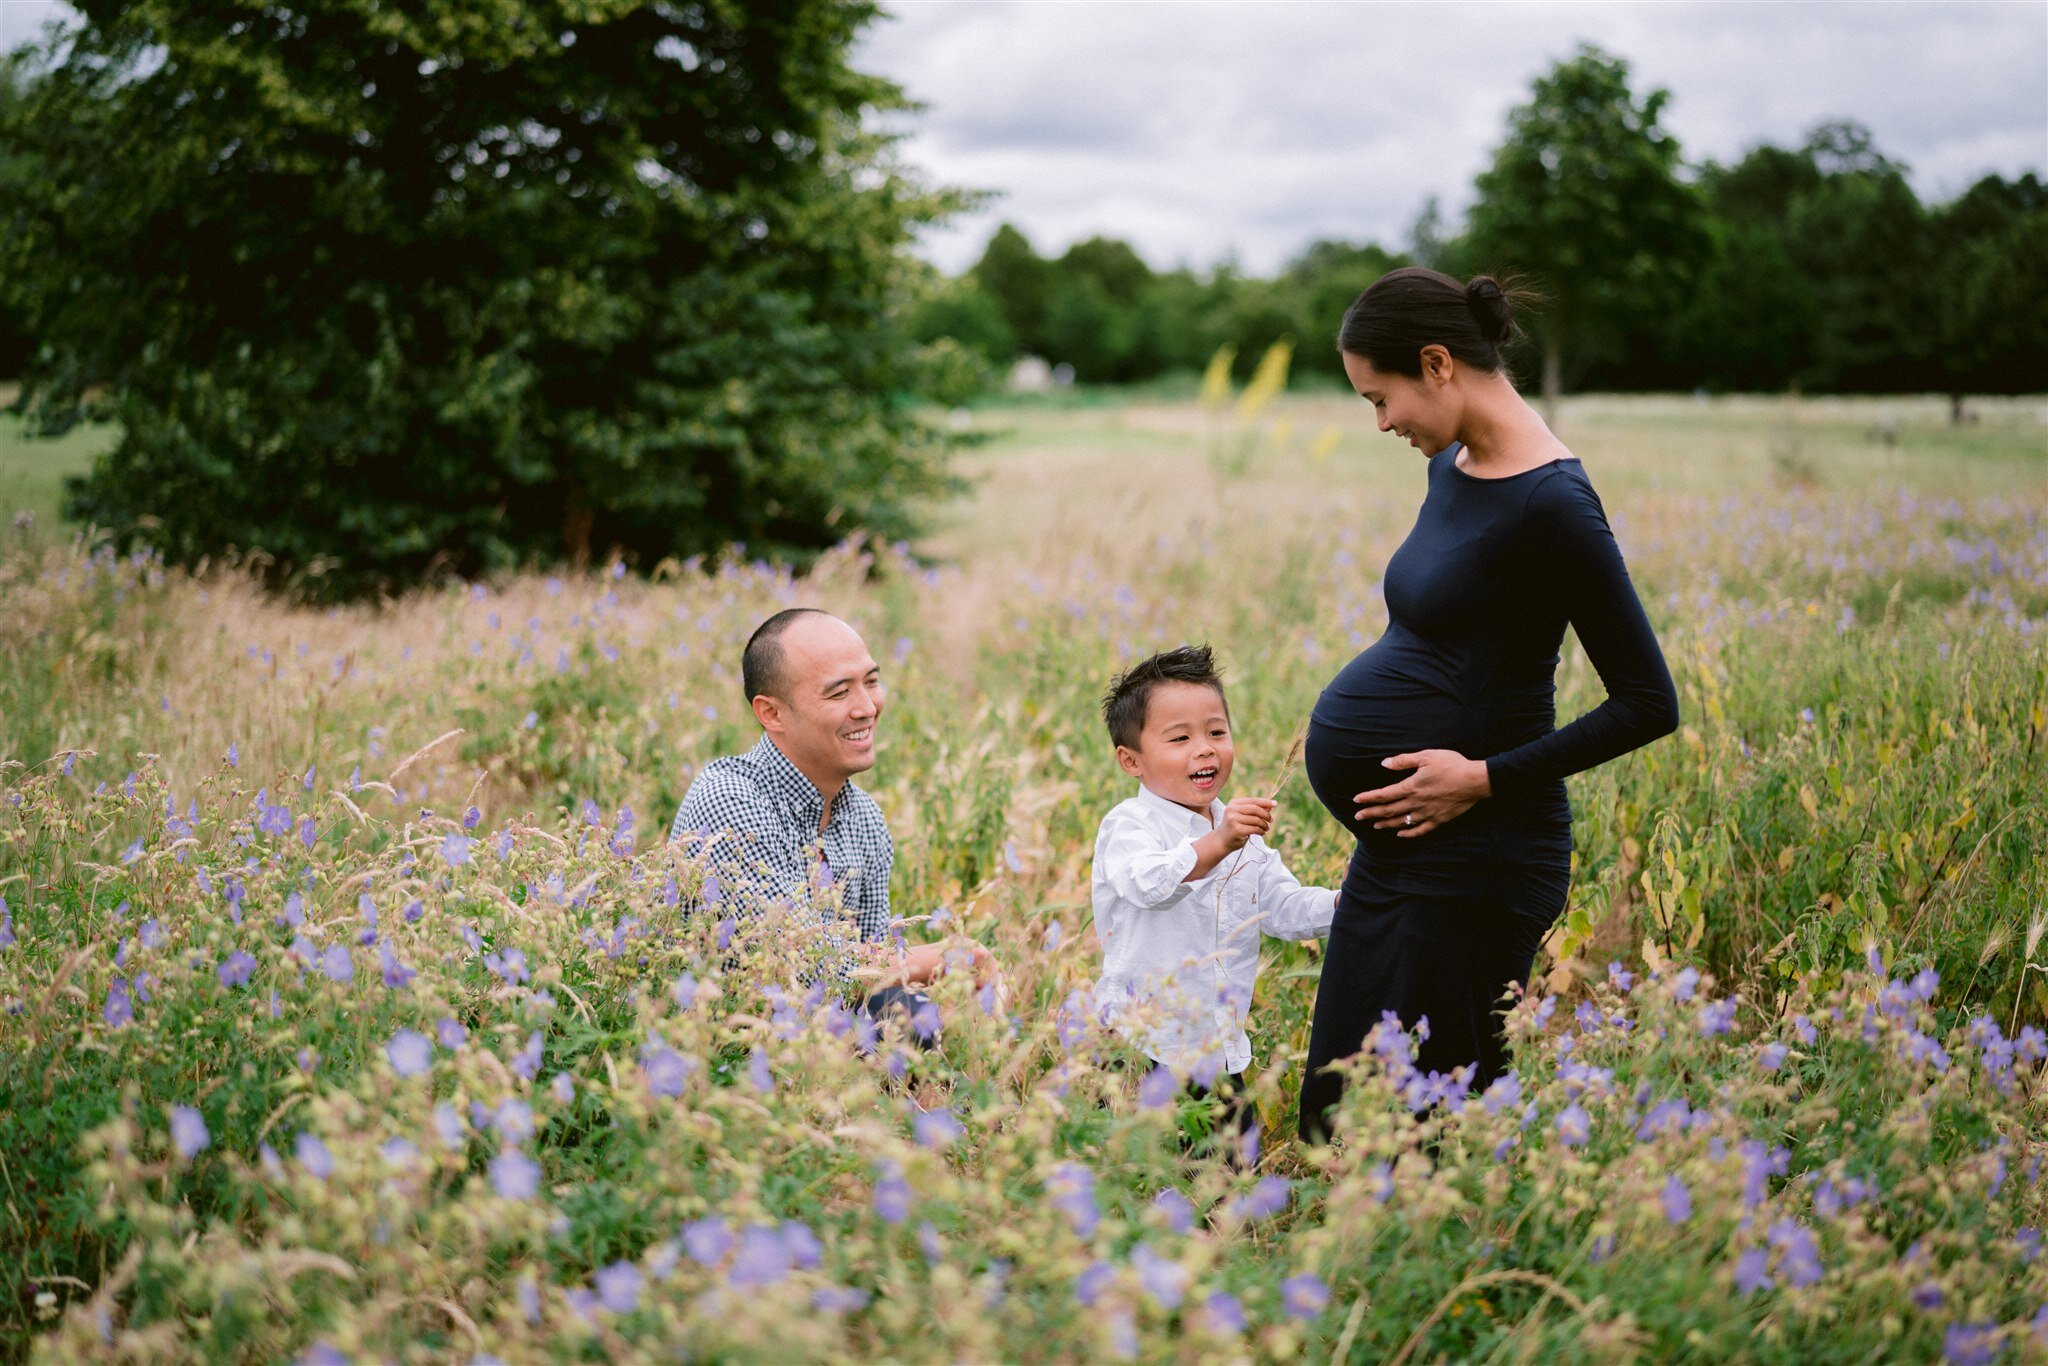 Natural Maternity Portrait Photographer in London